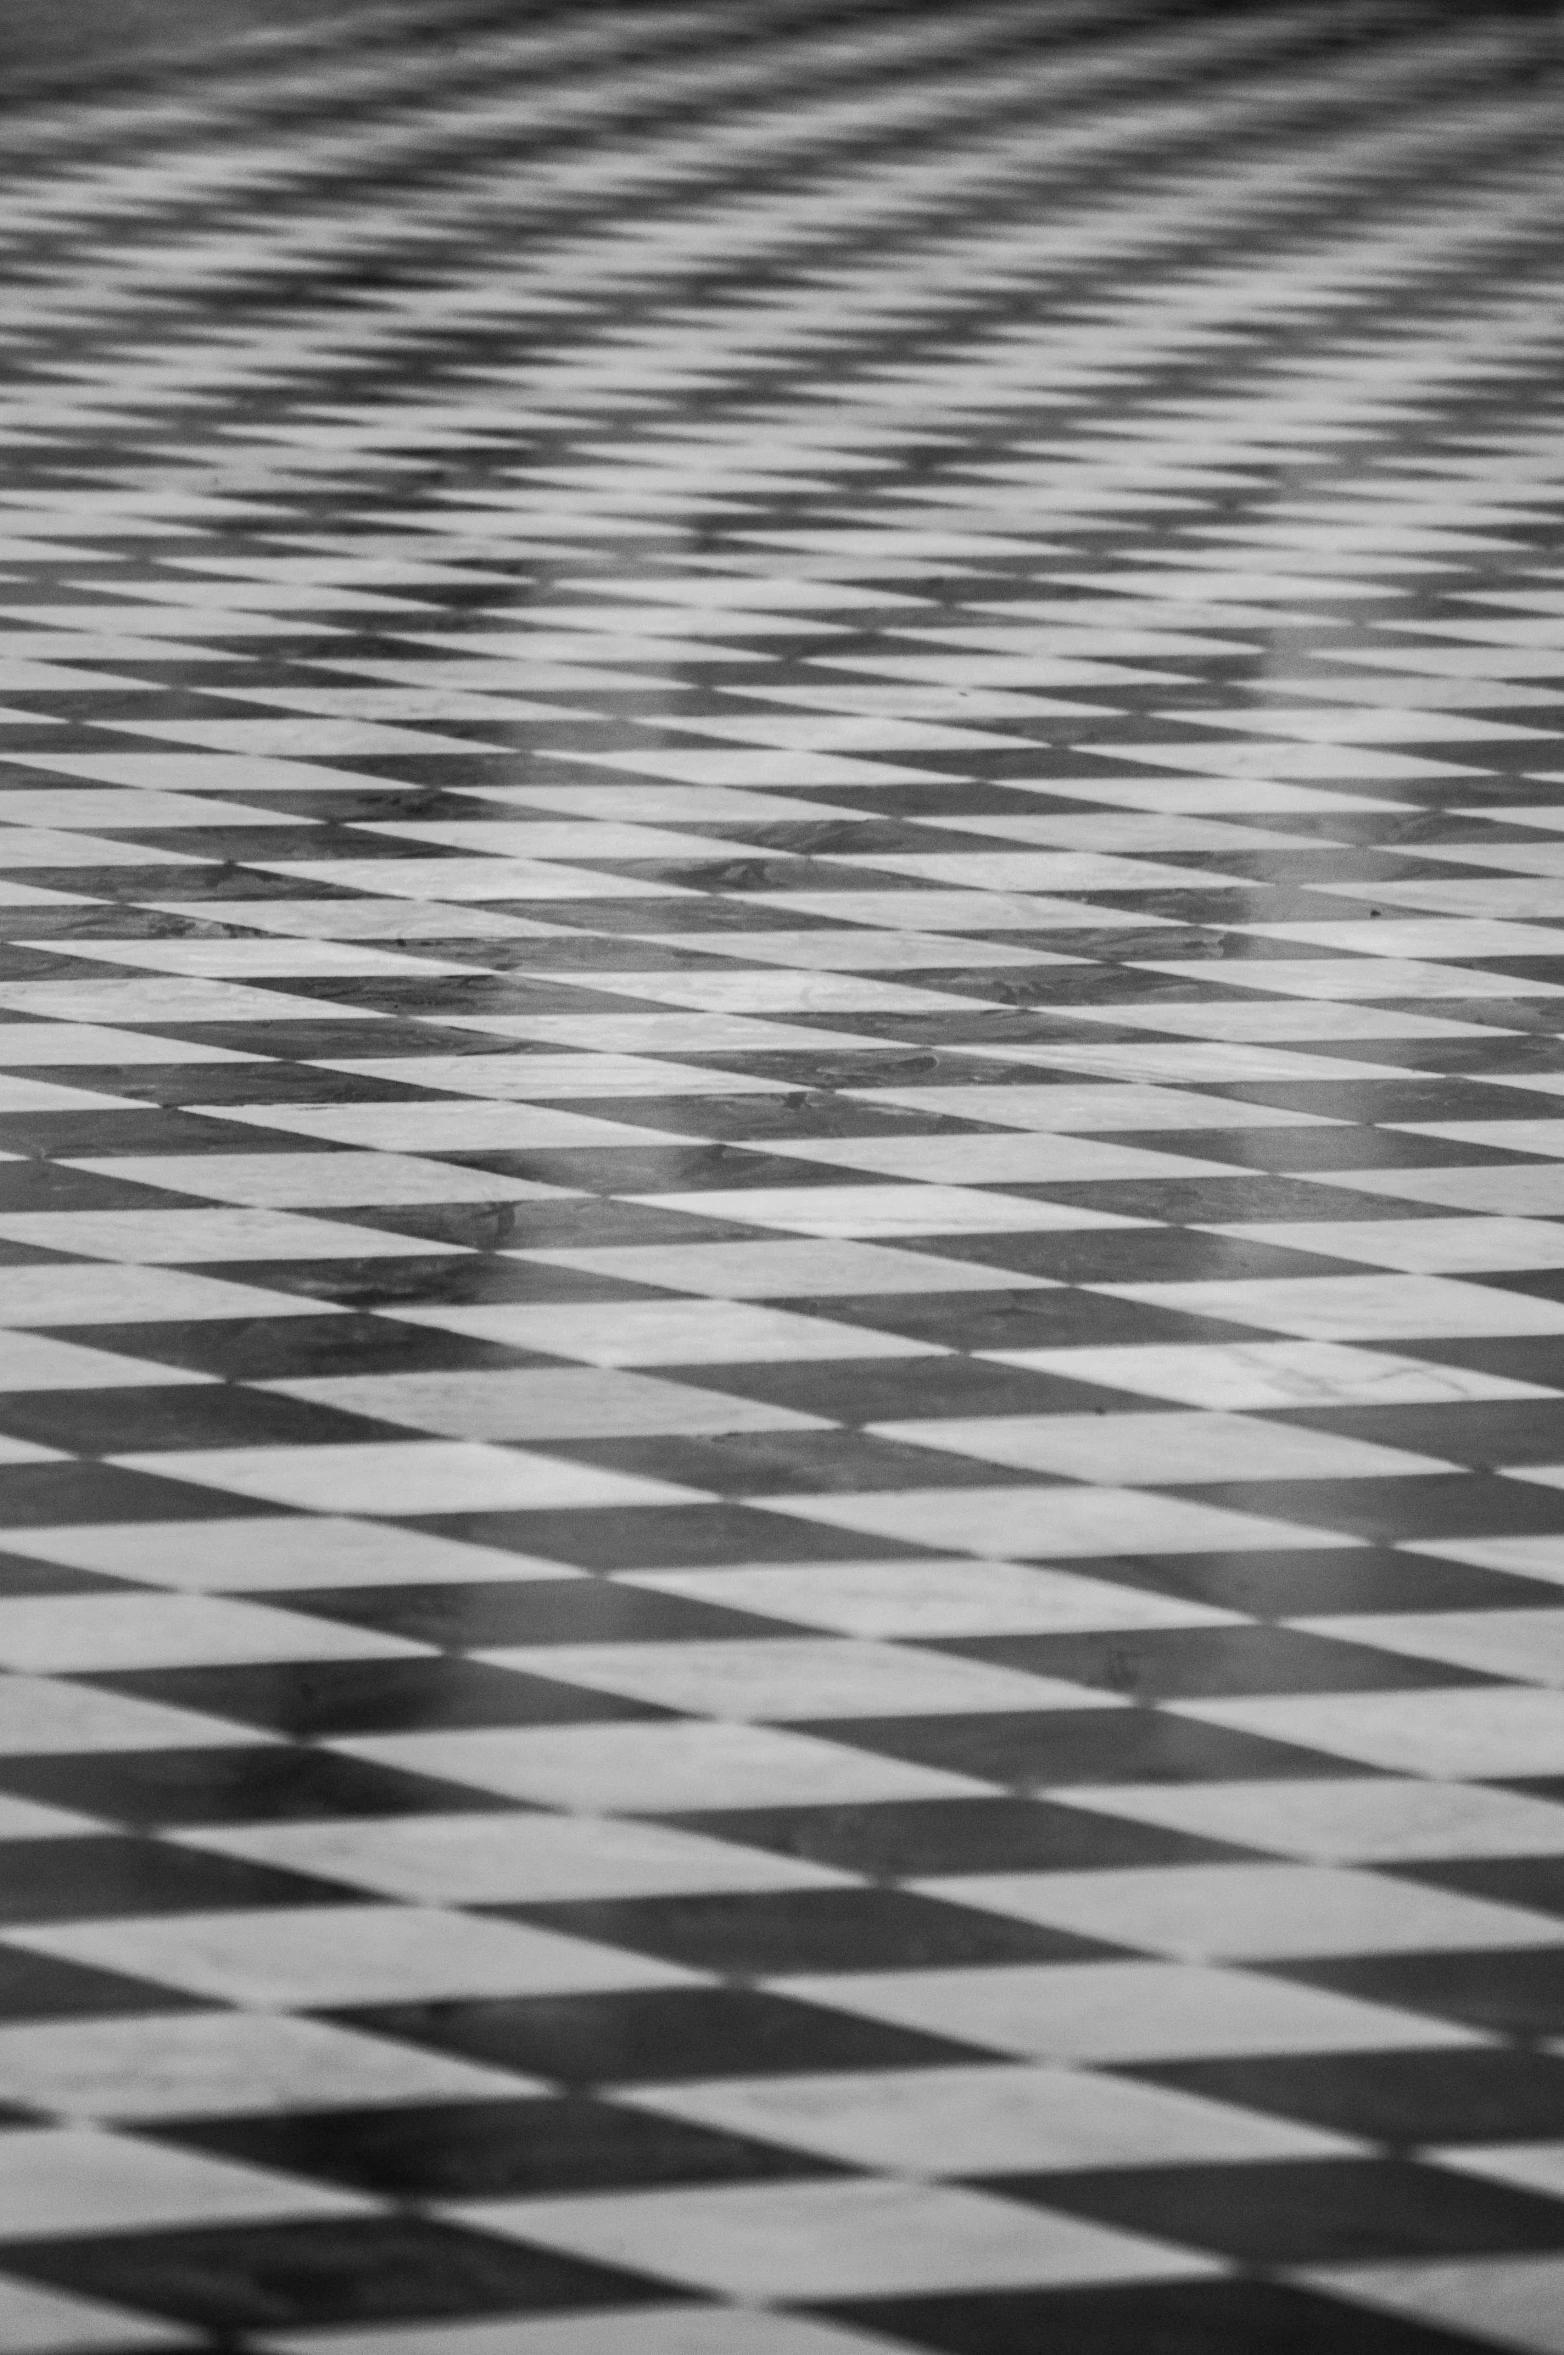 a black and white tiled floor with checkerboard pattern